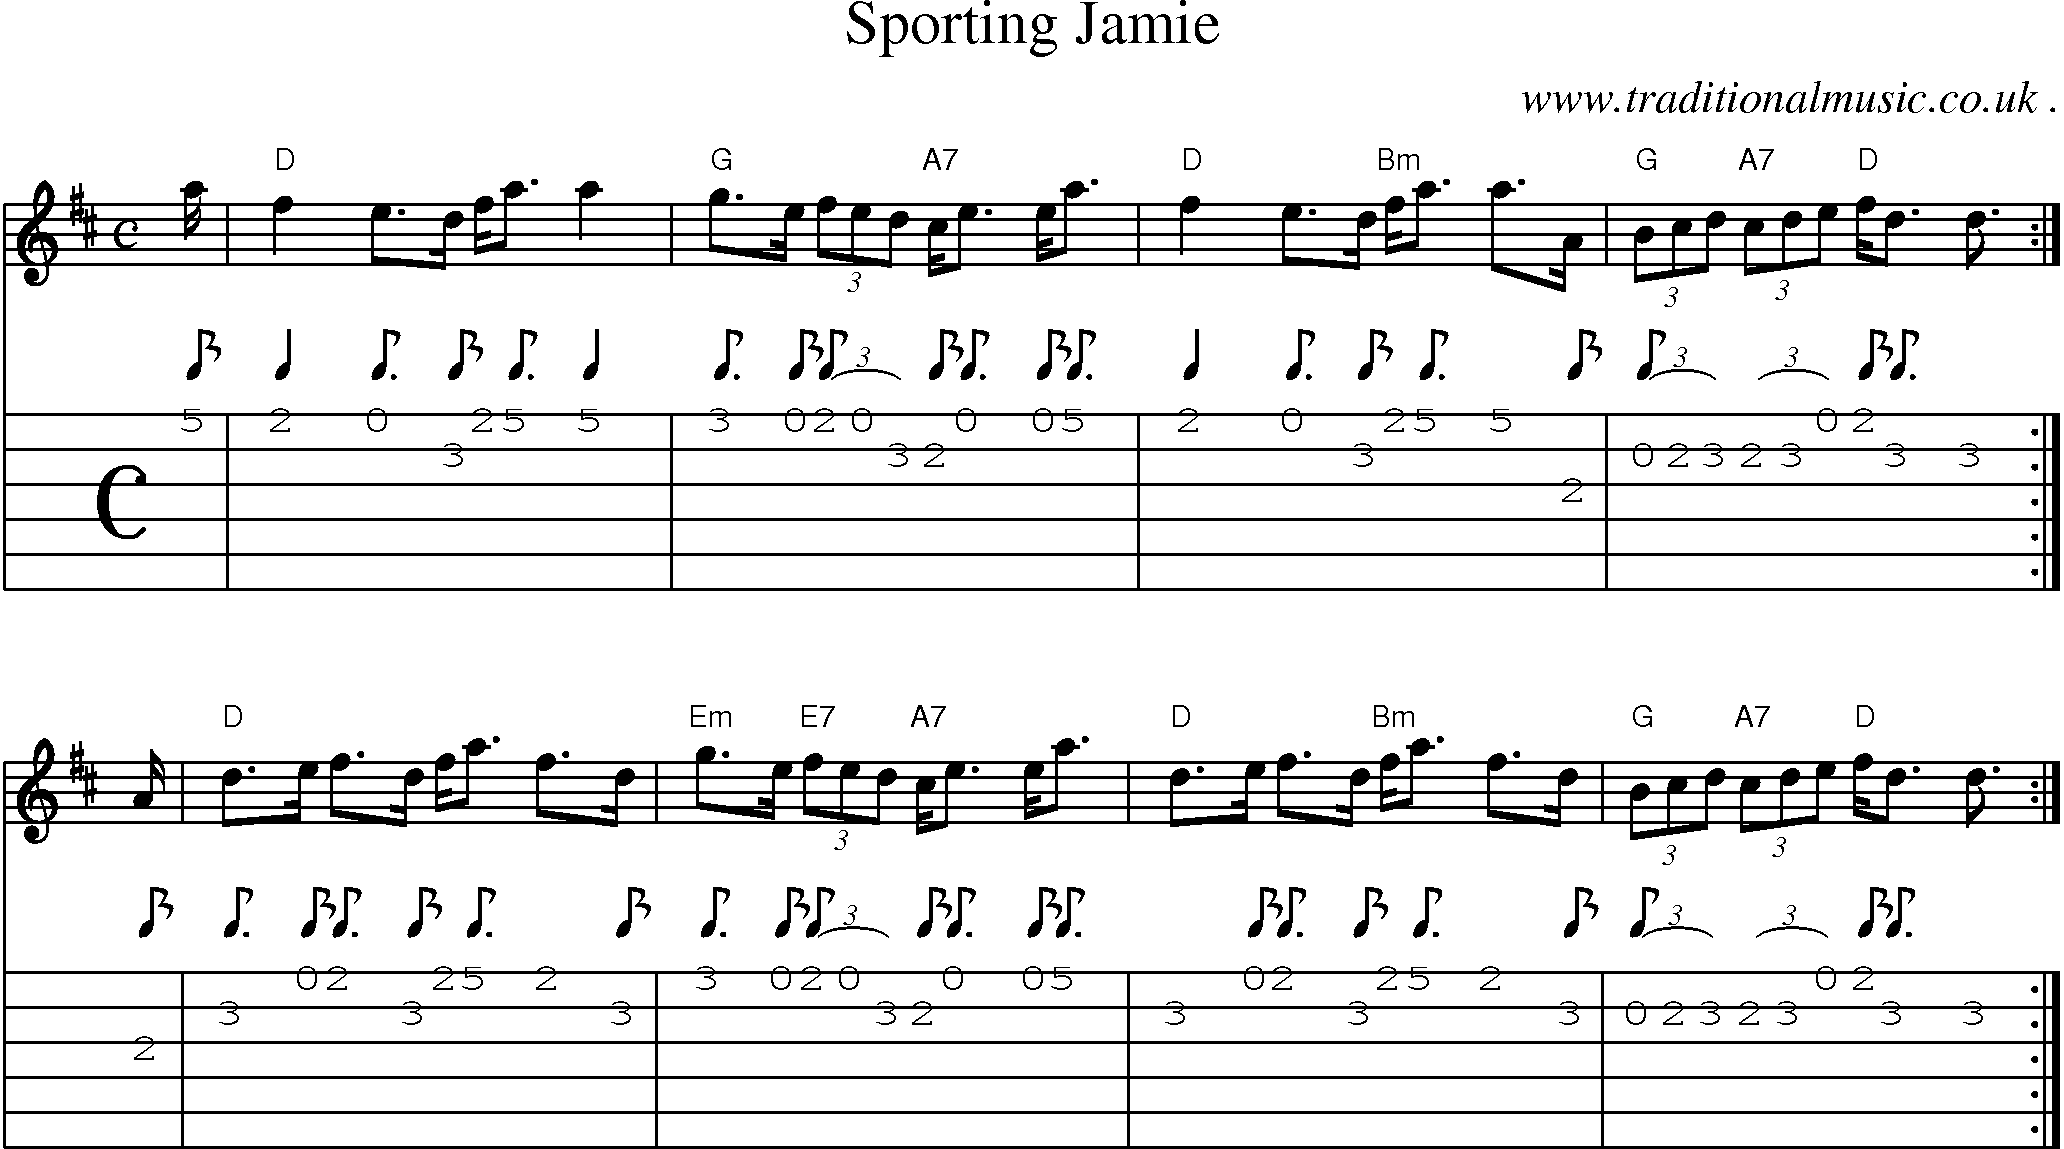 Sheet-music  score, Chords and Guitar Tabs for Sporting Jamie